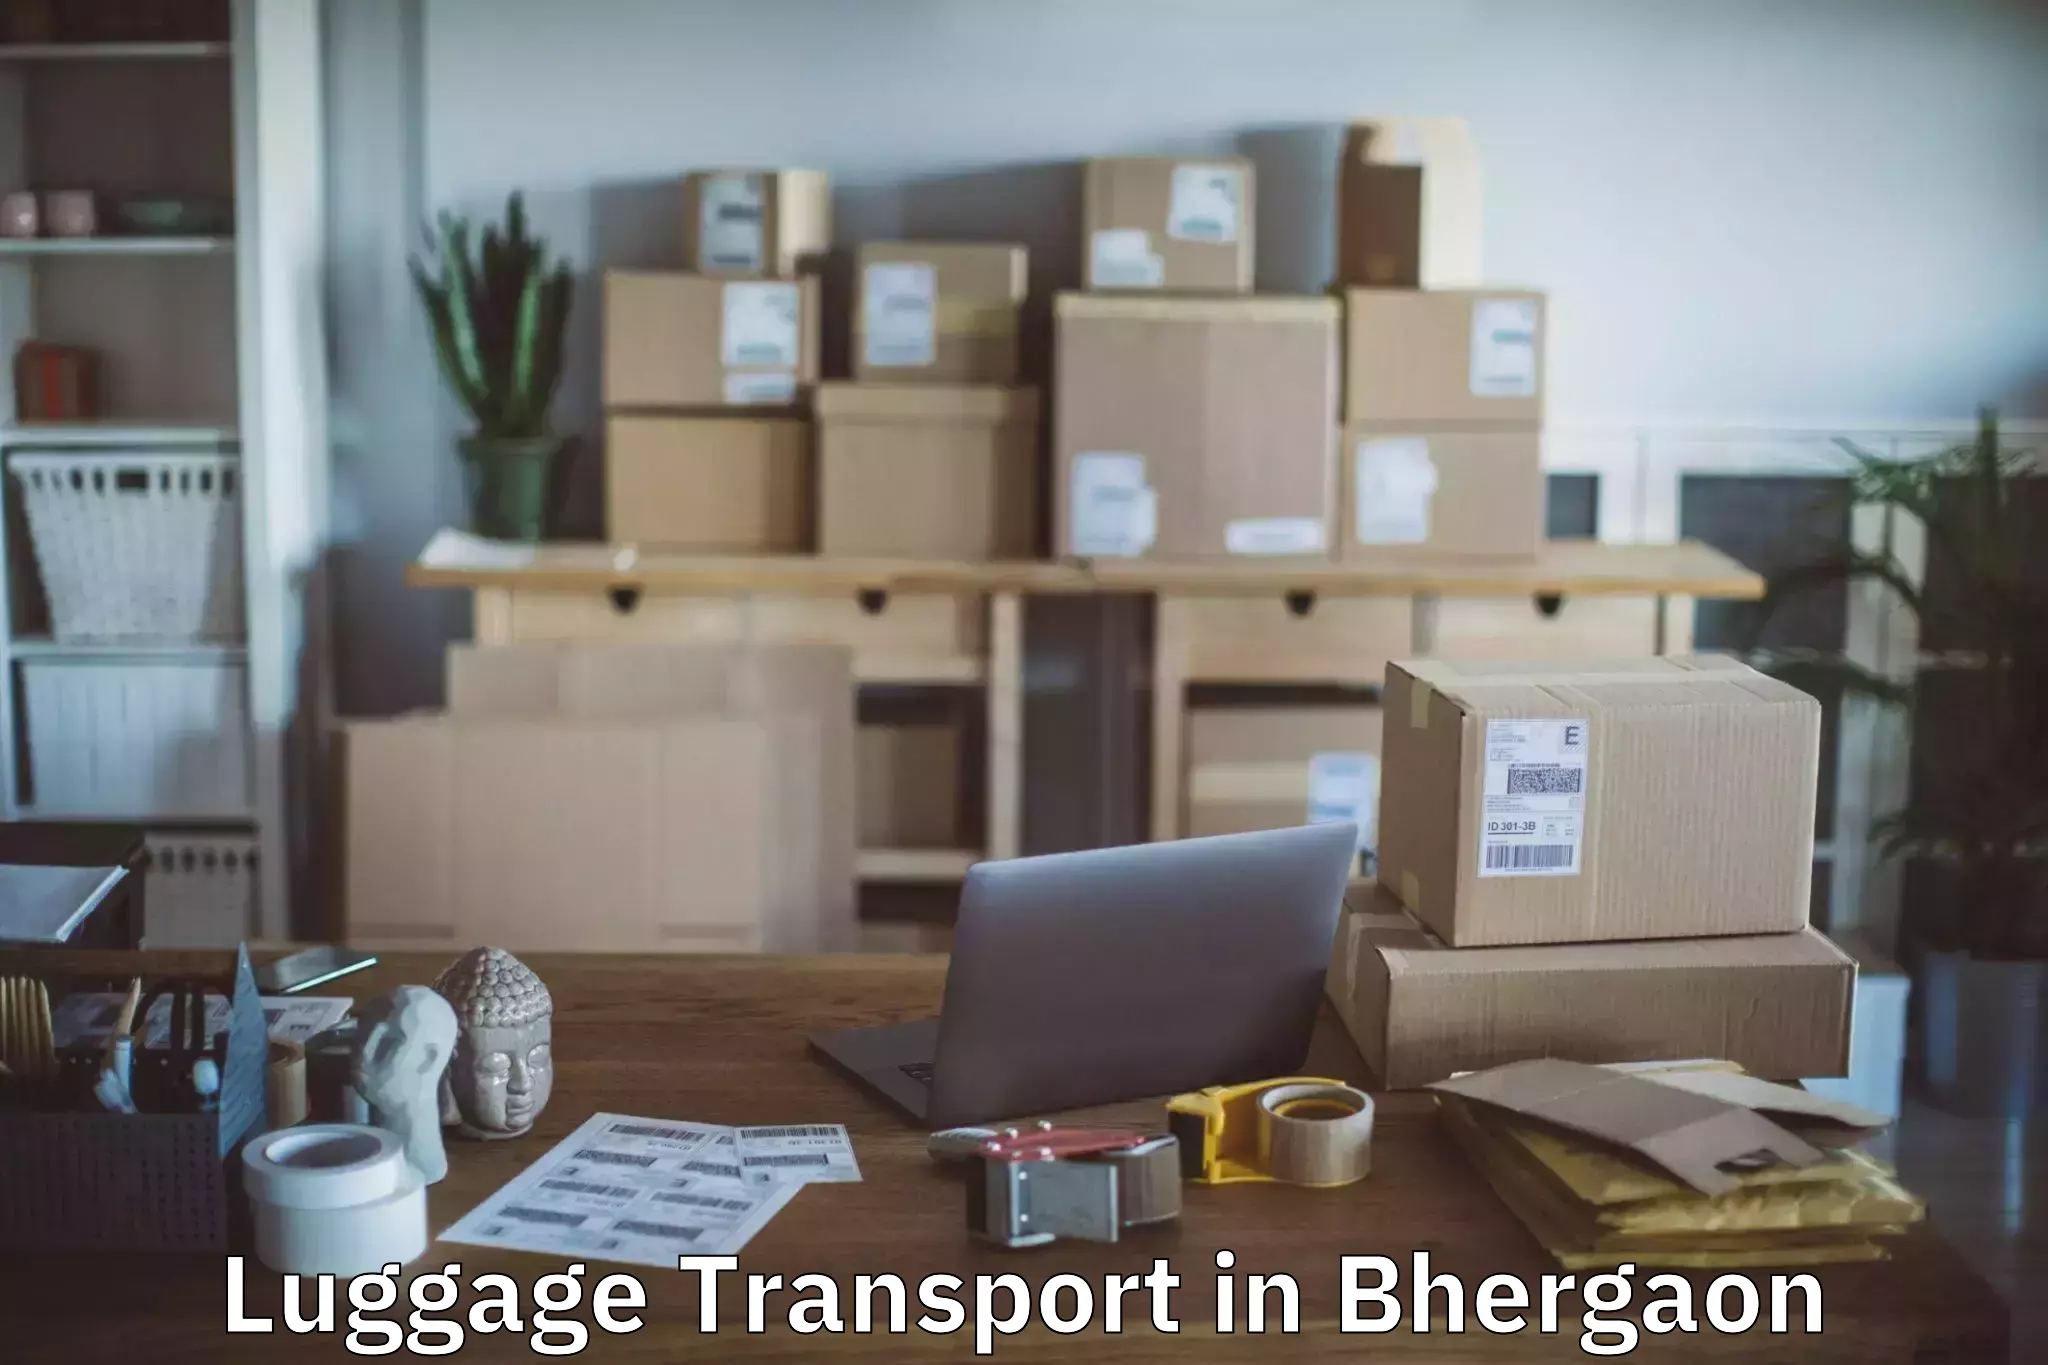 Luggage transport consulting in Bhergaon